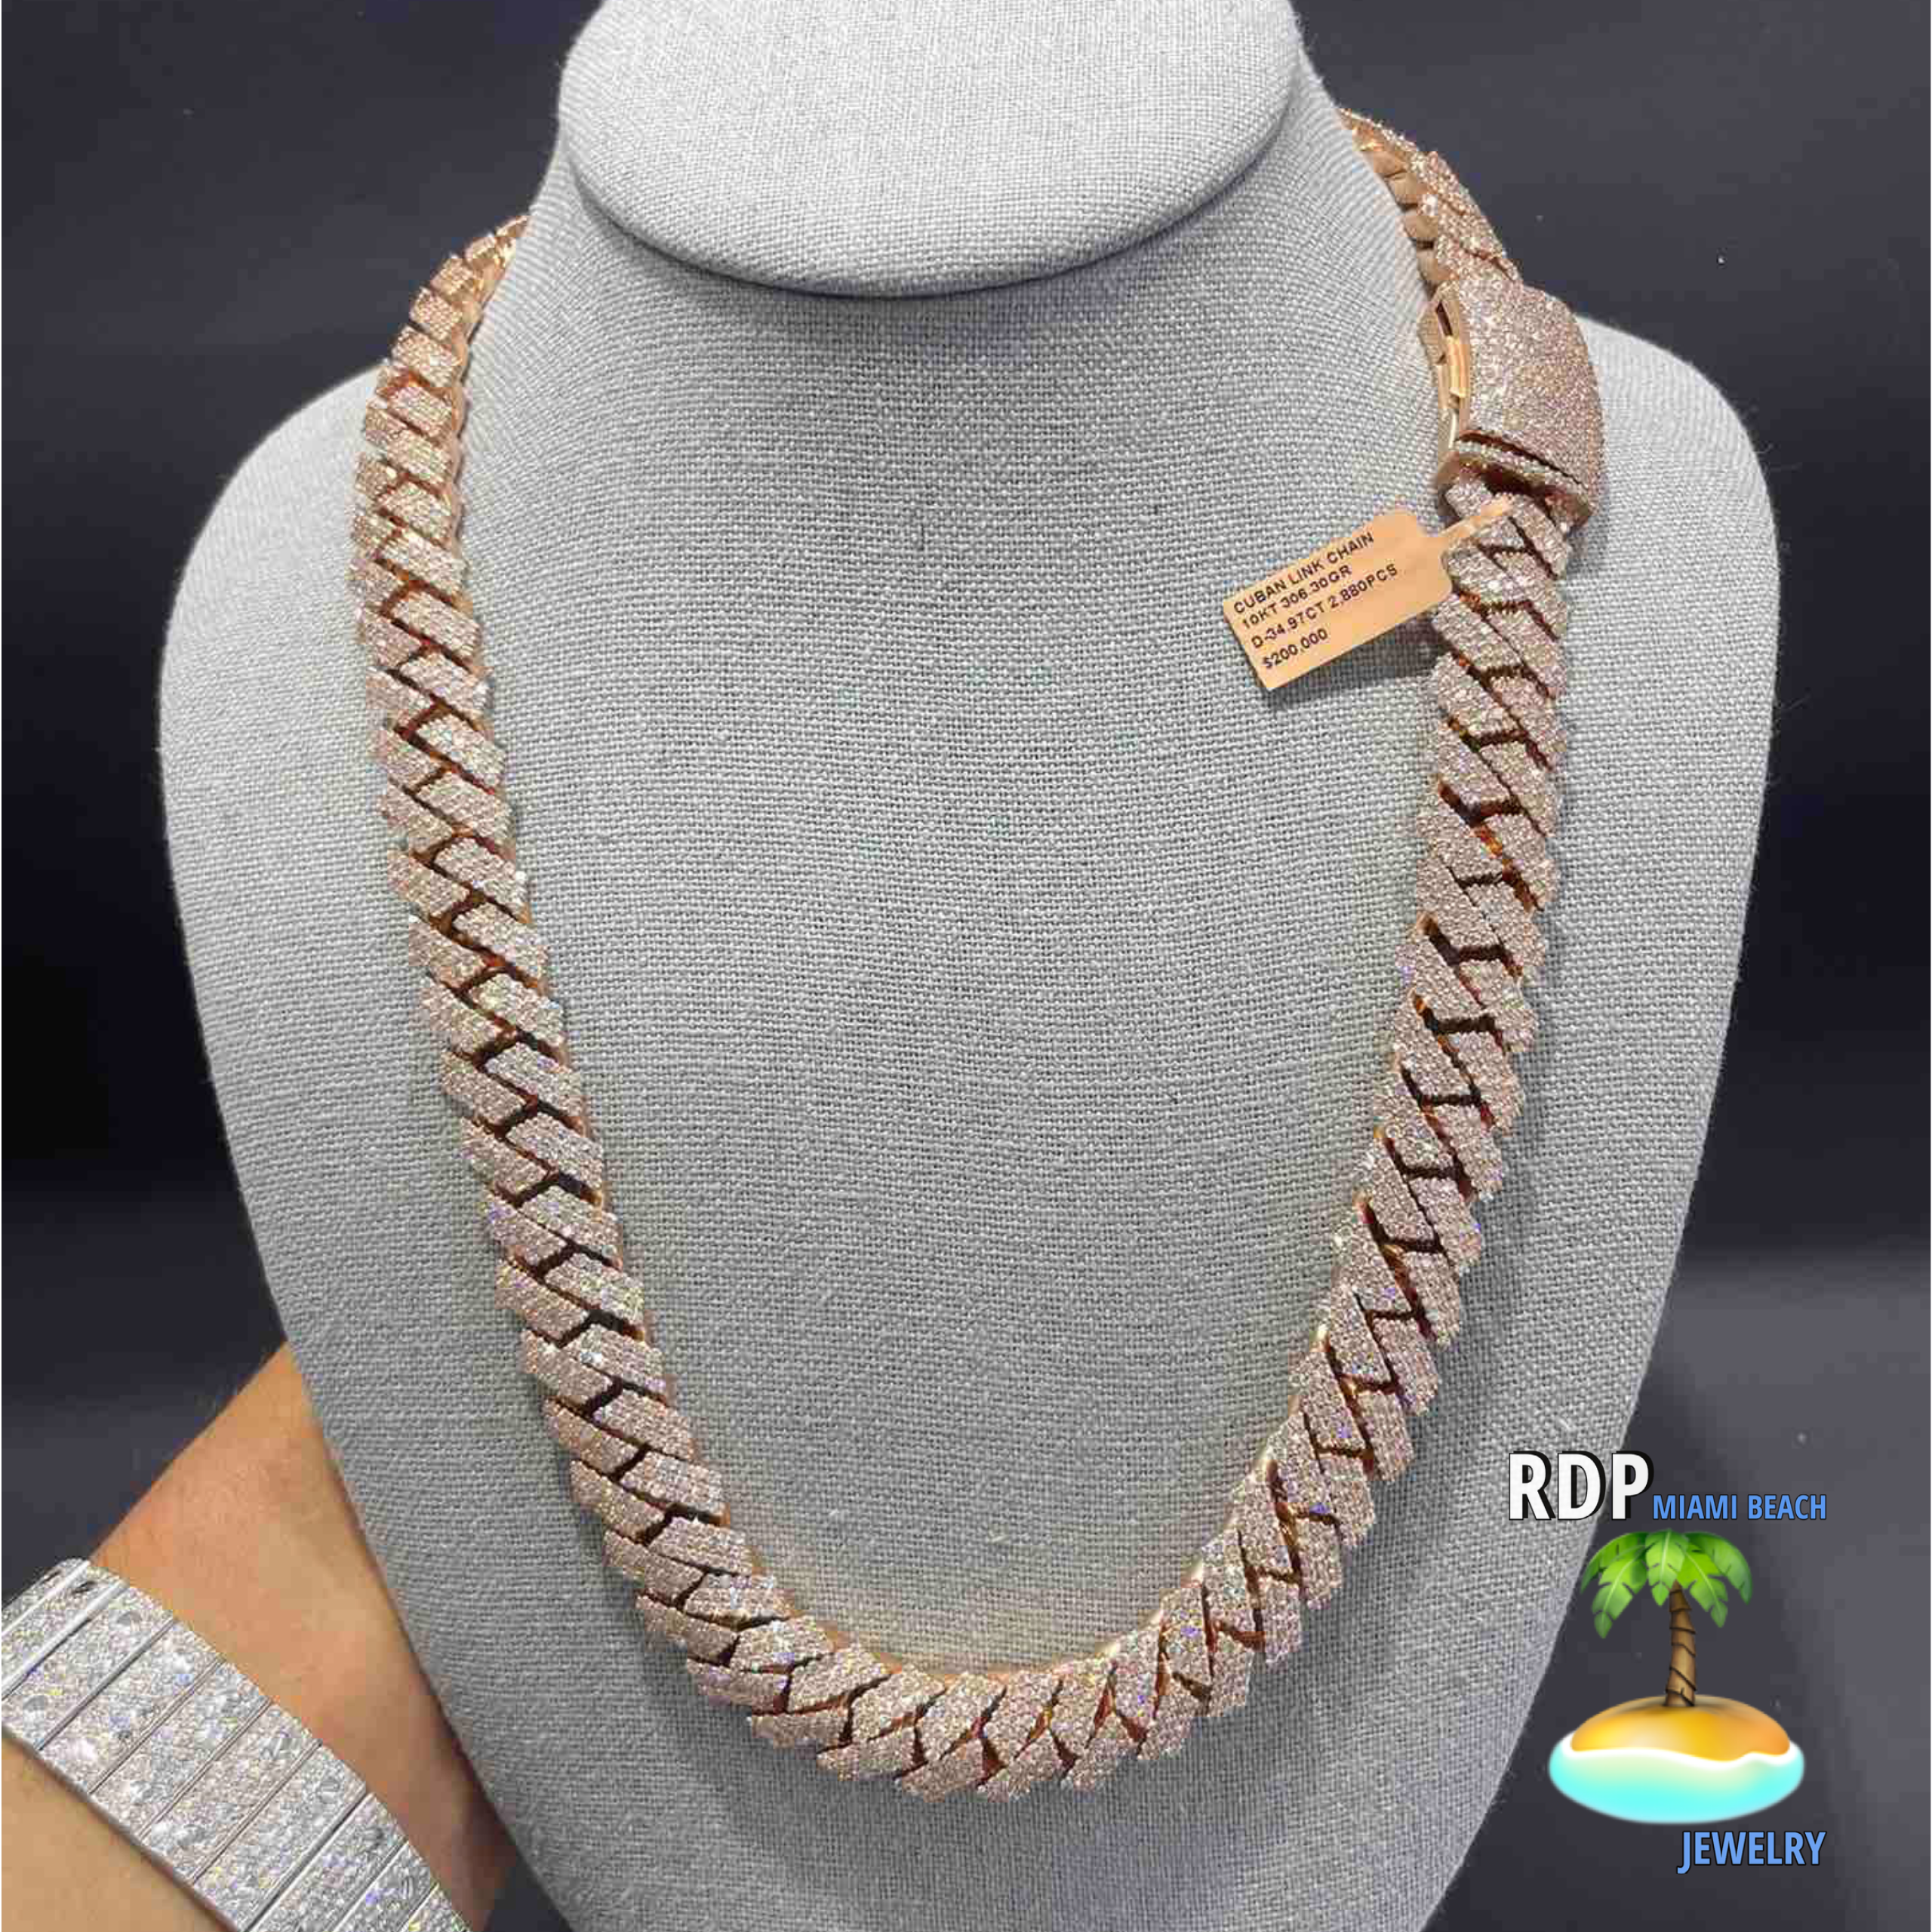 The Elegance of Solid Gold Chains at RDP Miami Beach Jewelry